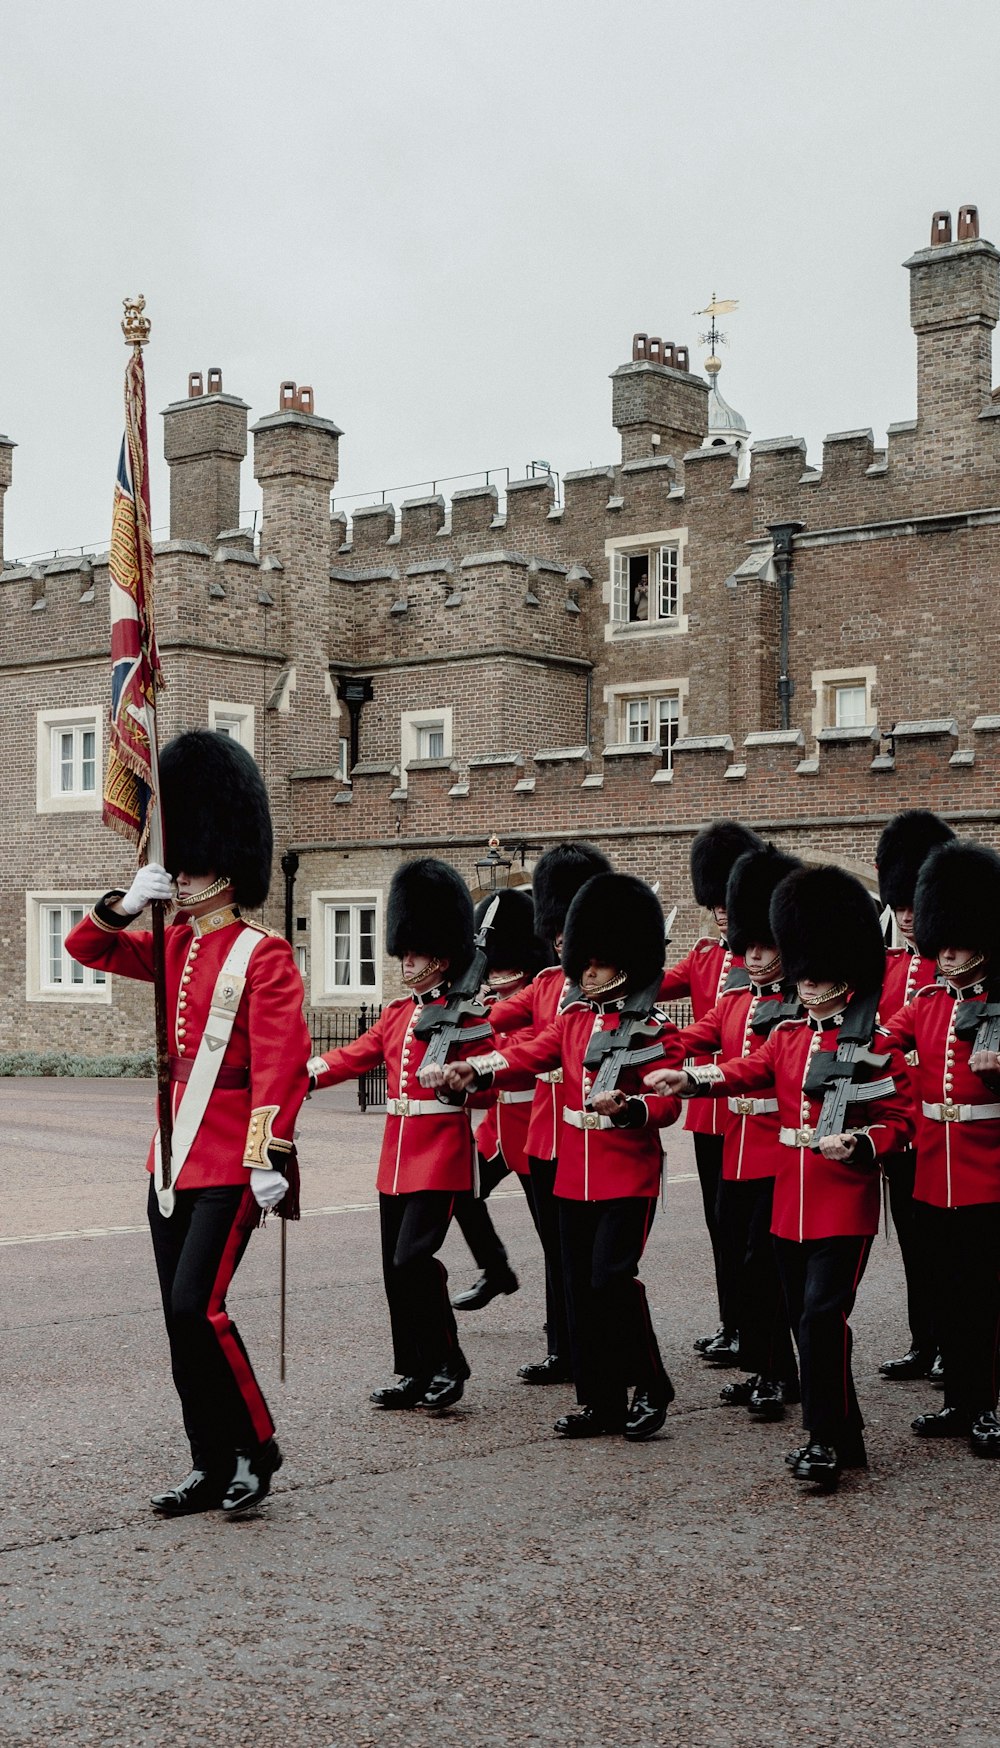 royal guards parading near building during day